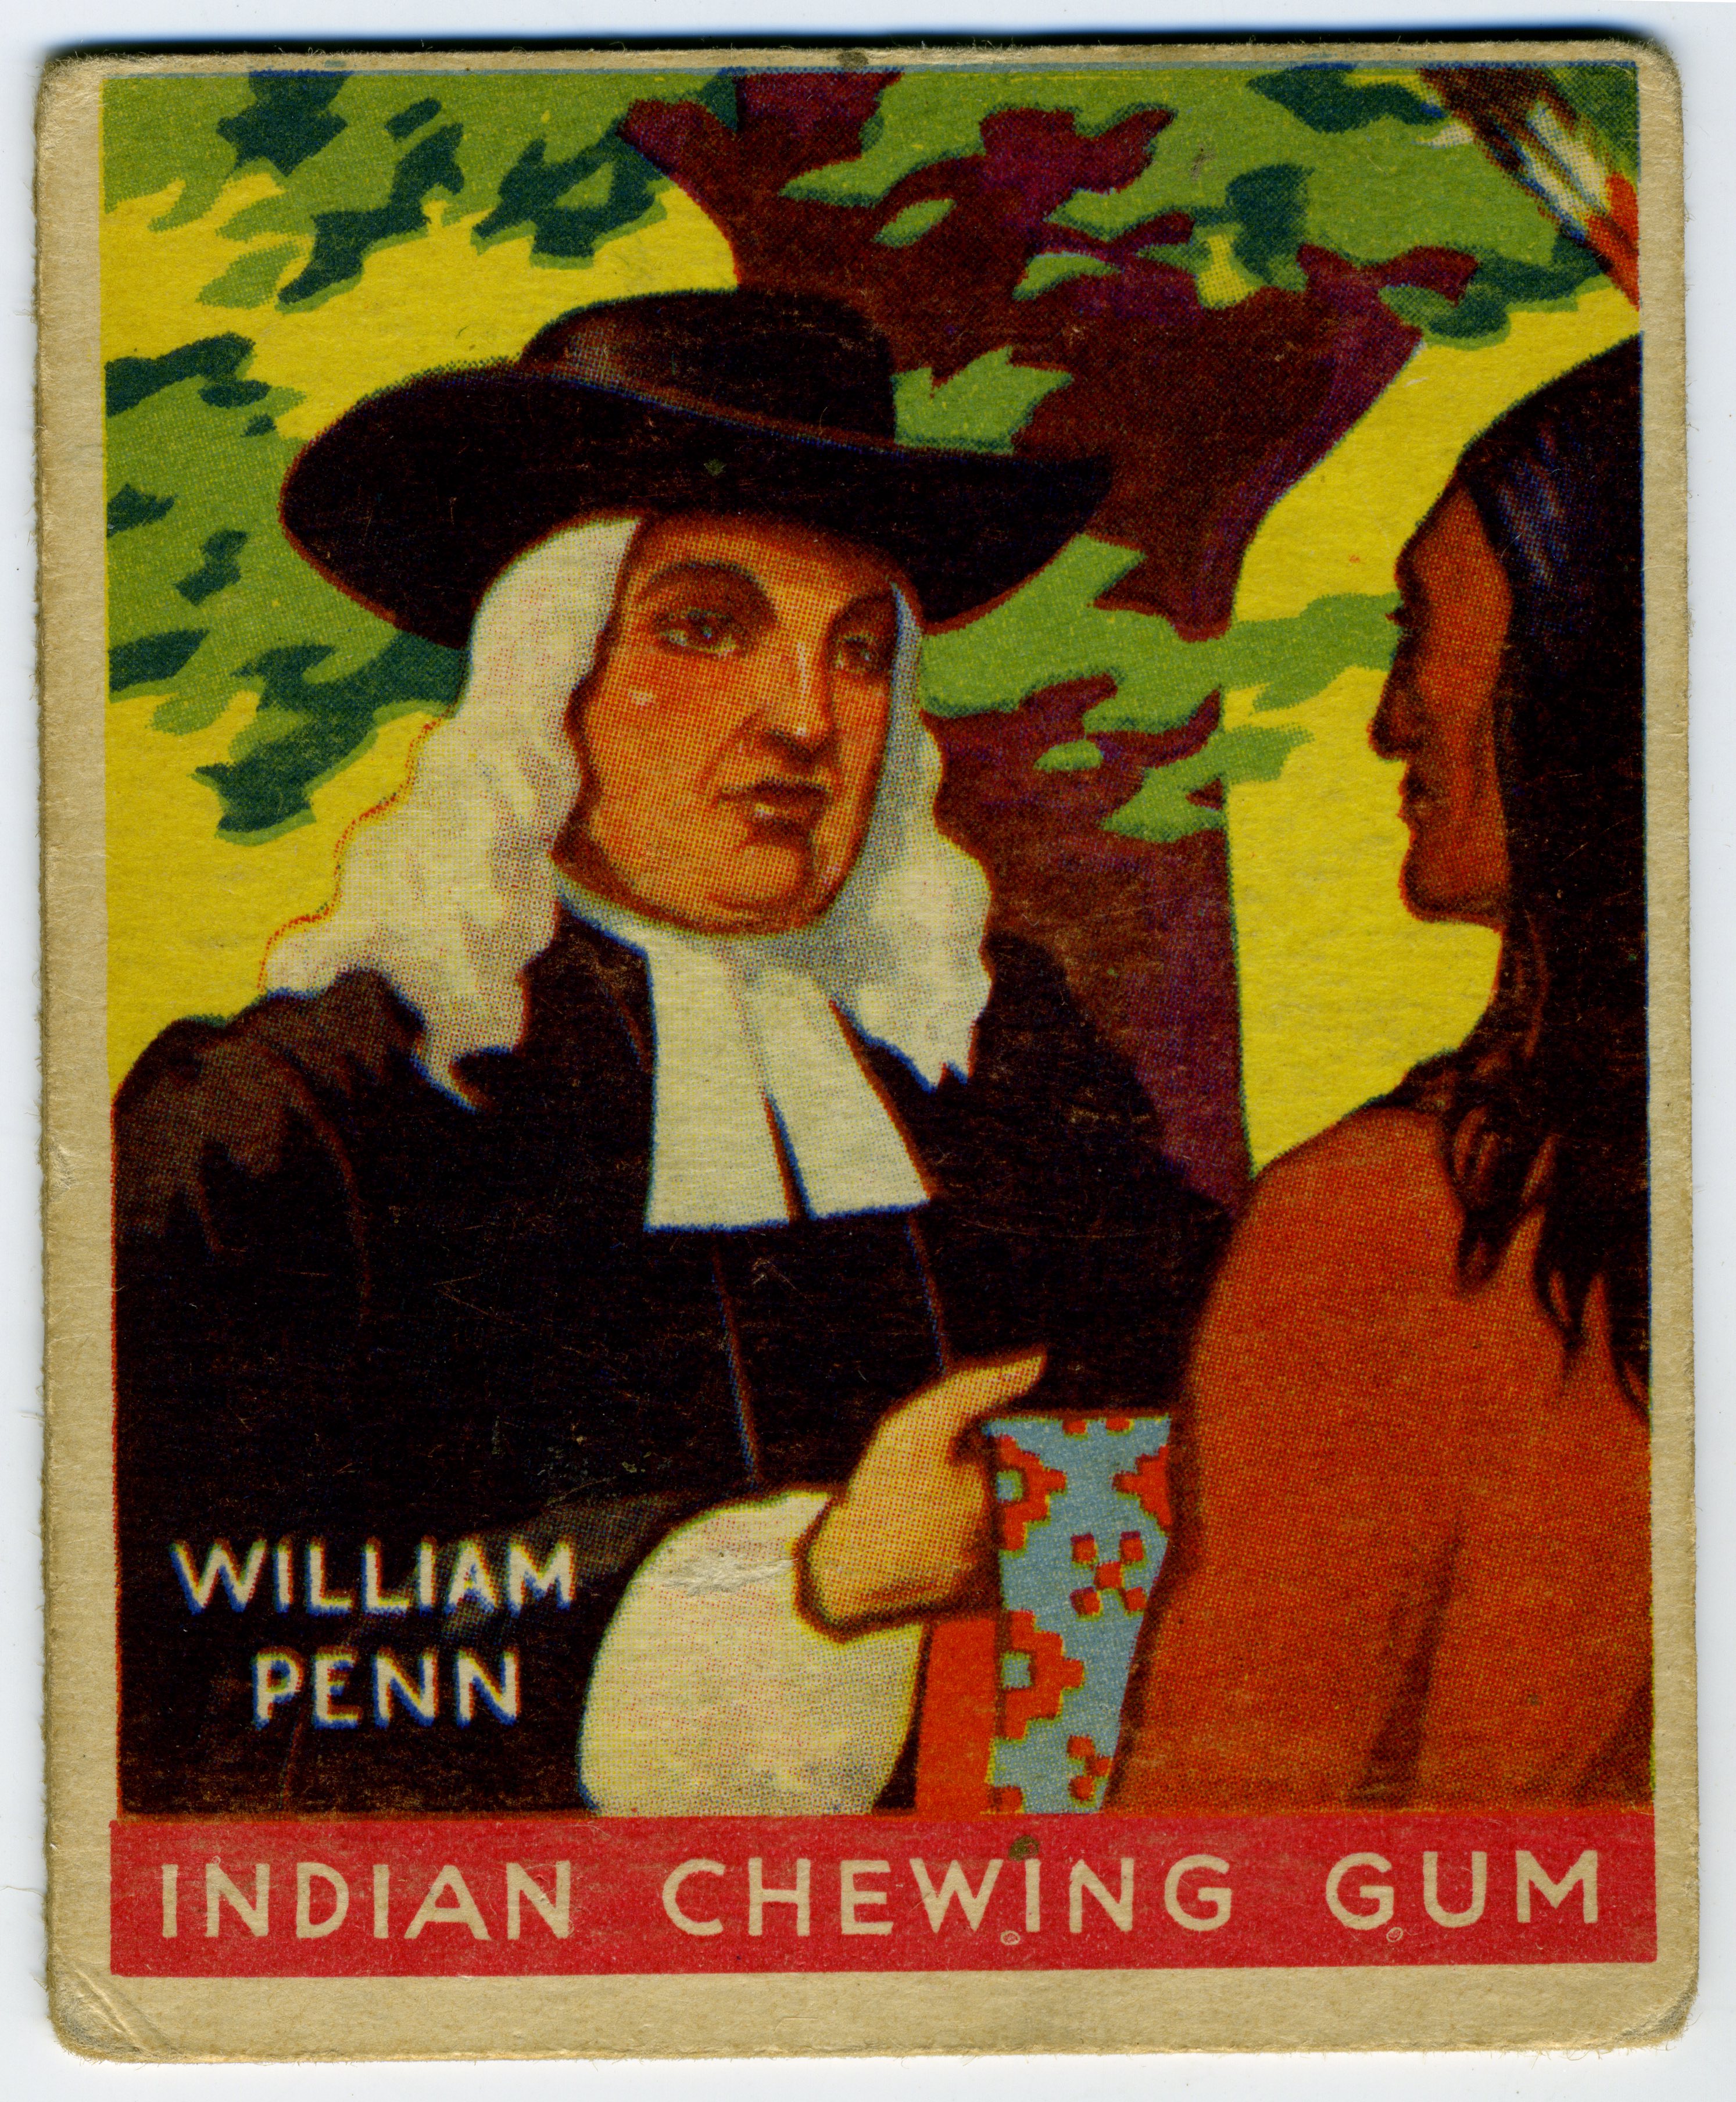 Goudey Indian Gum trading card, front